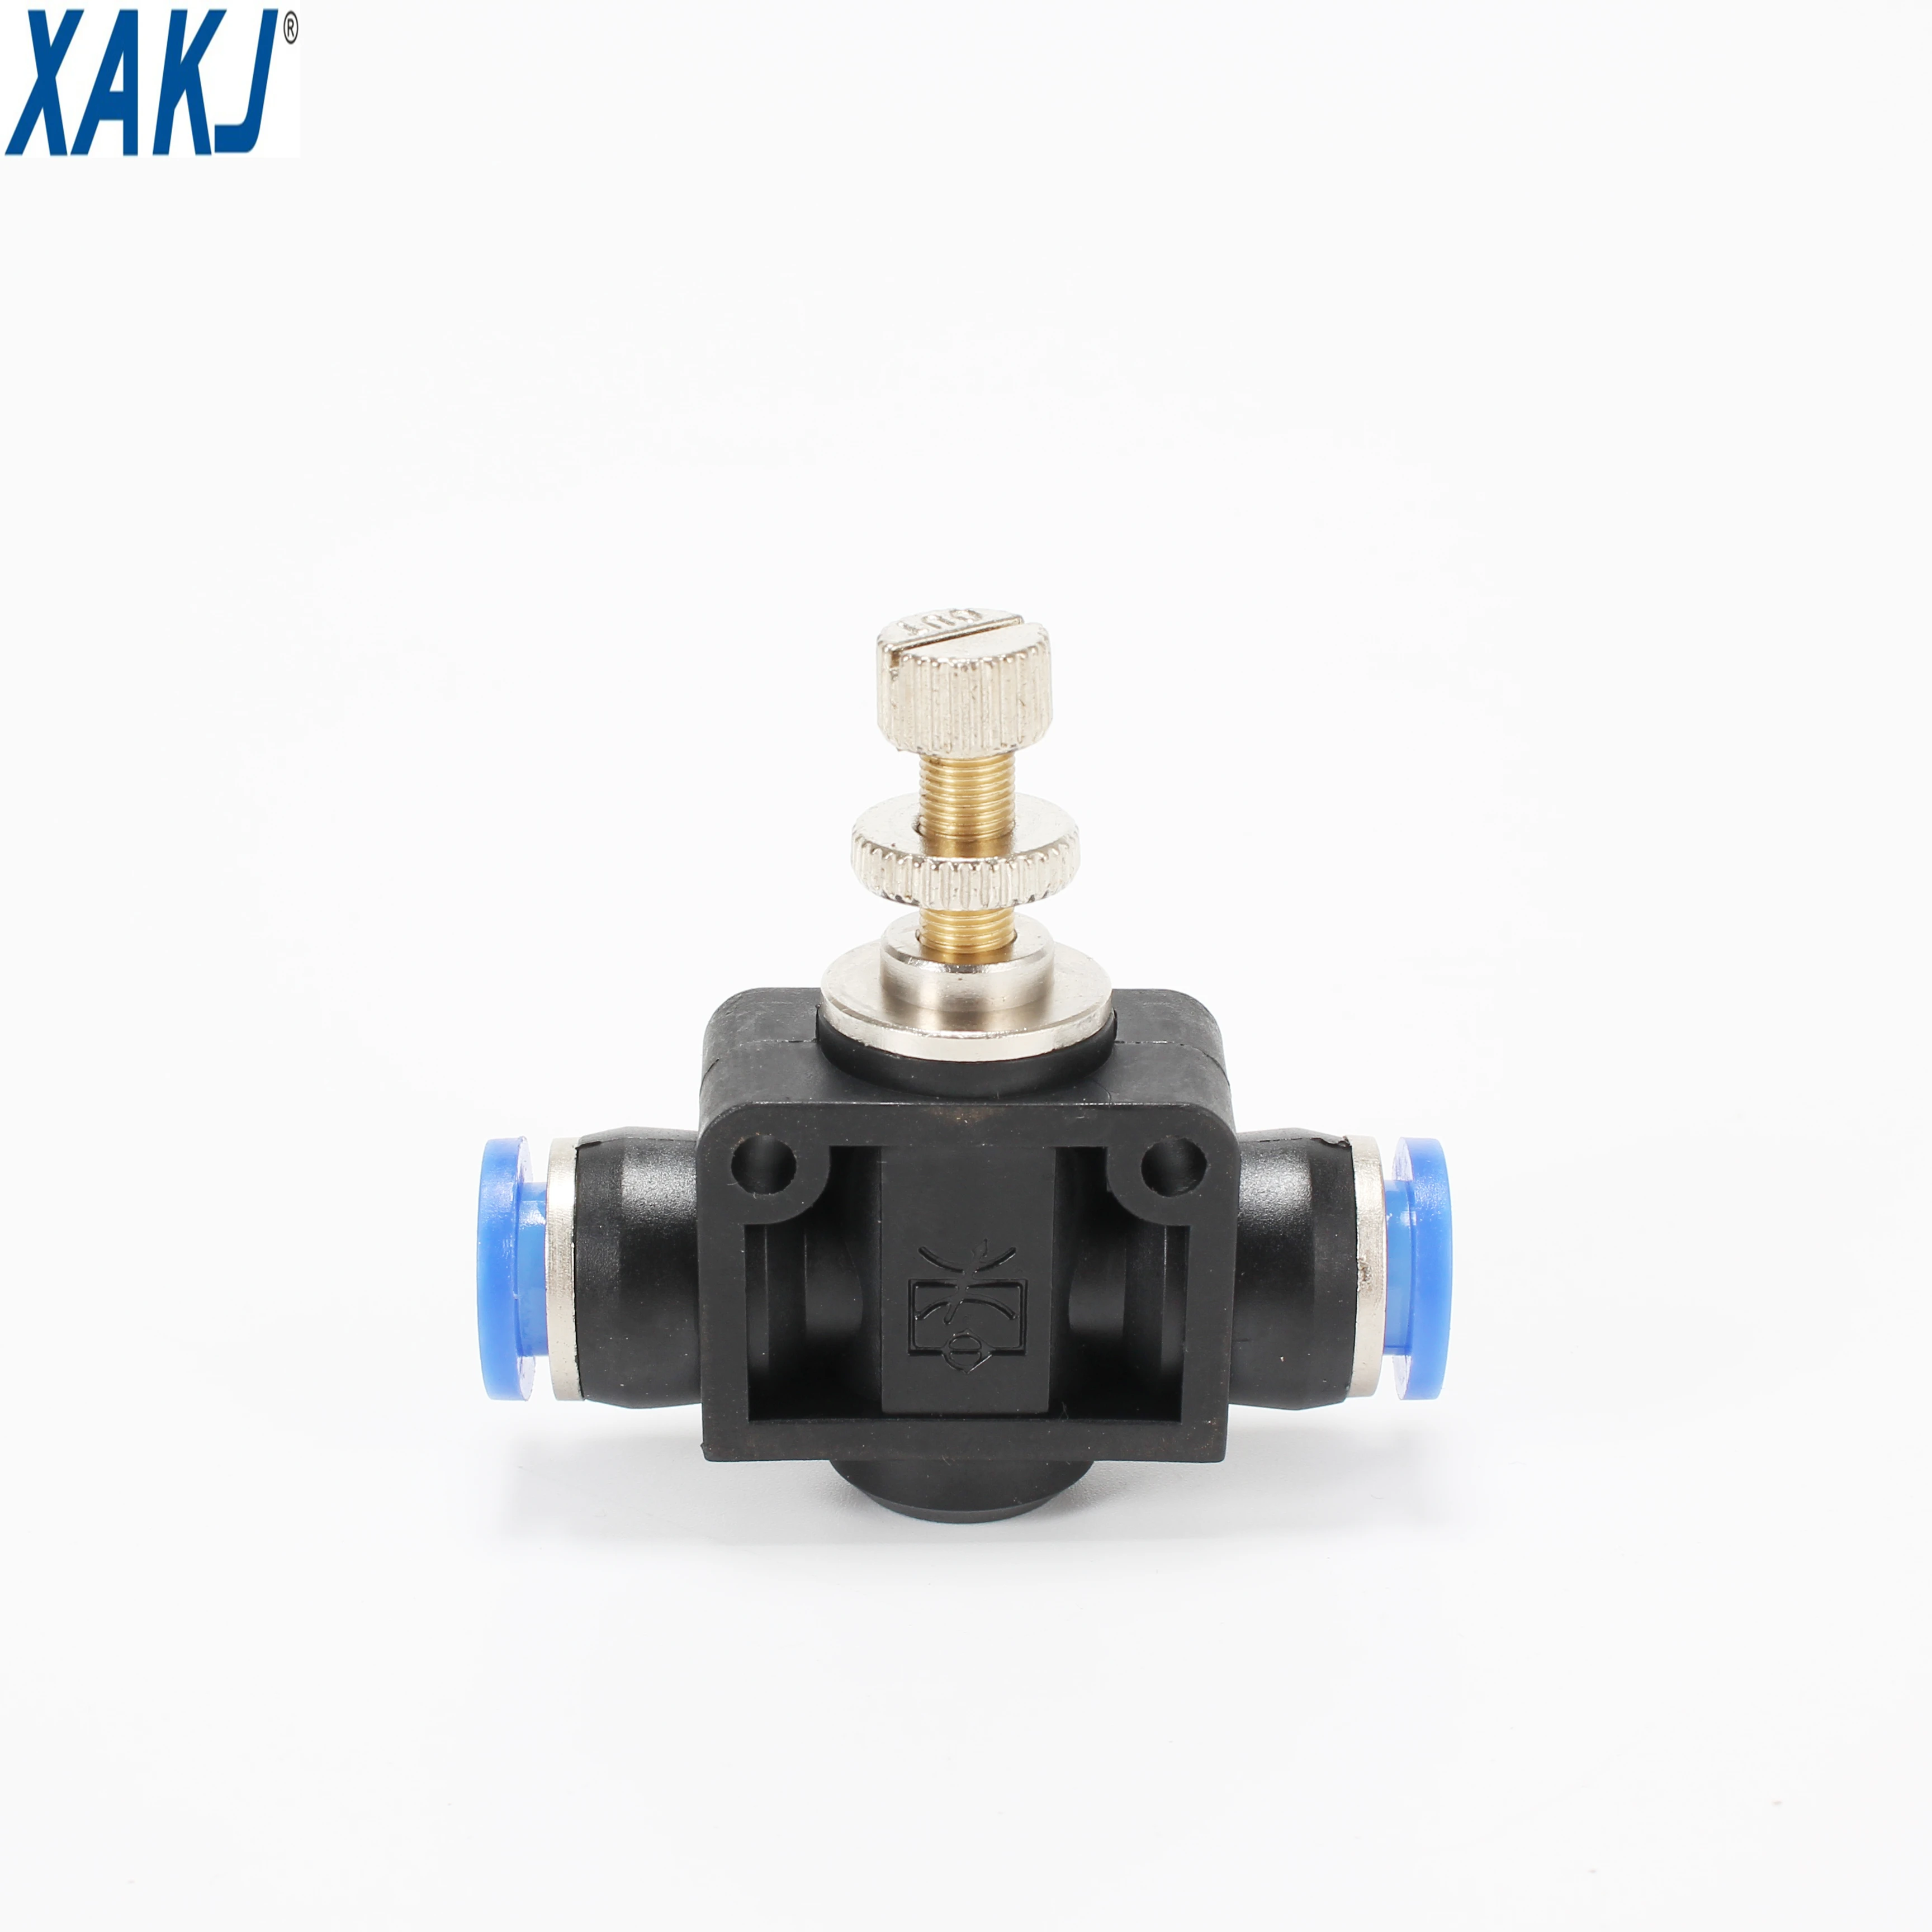 XAKJ PA Air Flow Speed Control Valve Plastic Blue pneumatic fittings Air Speed Controllers Push-to-connect tube fitting